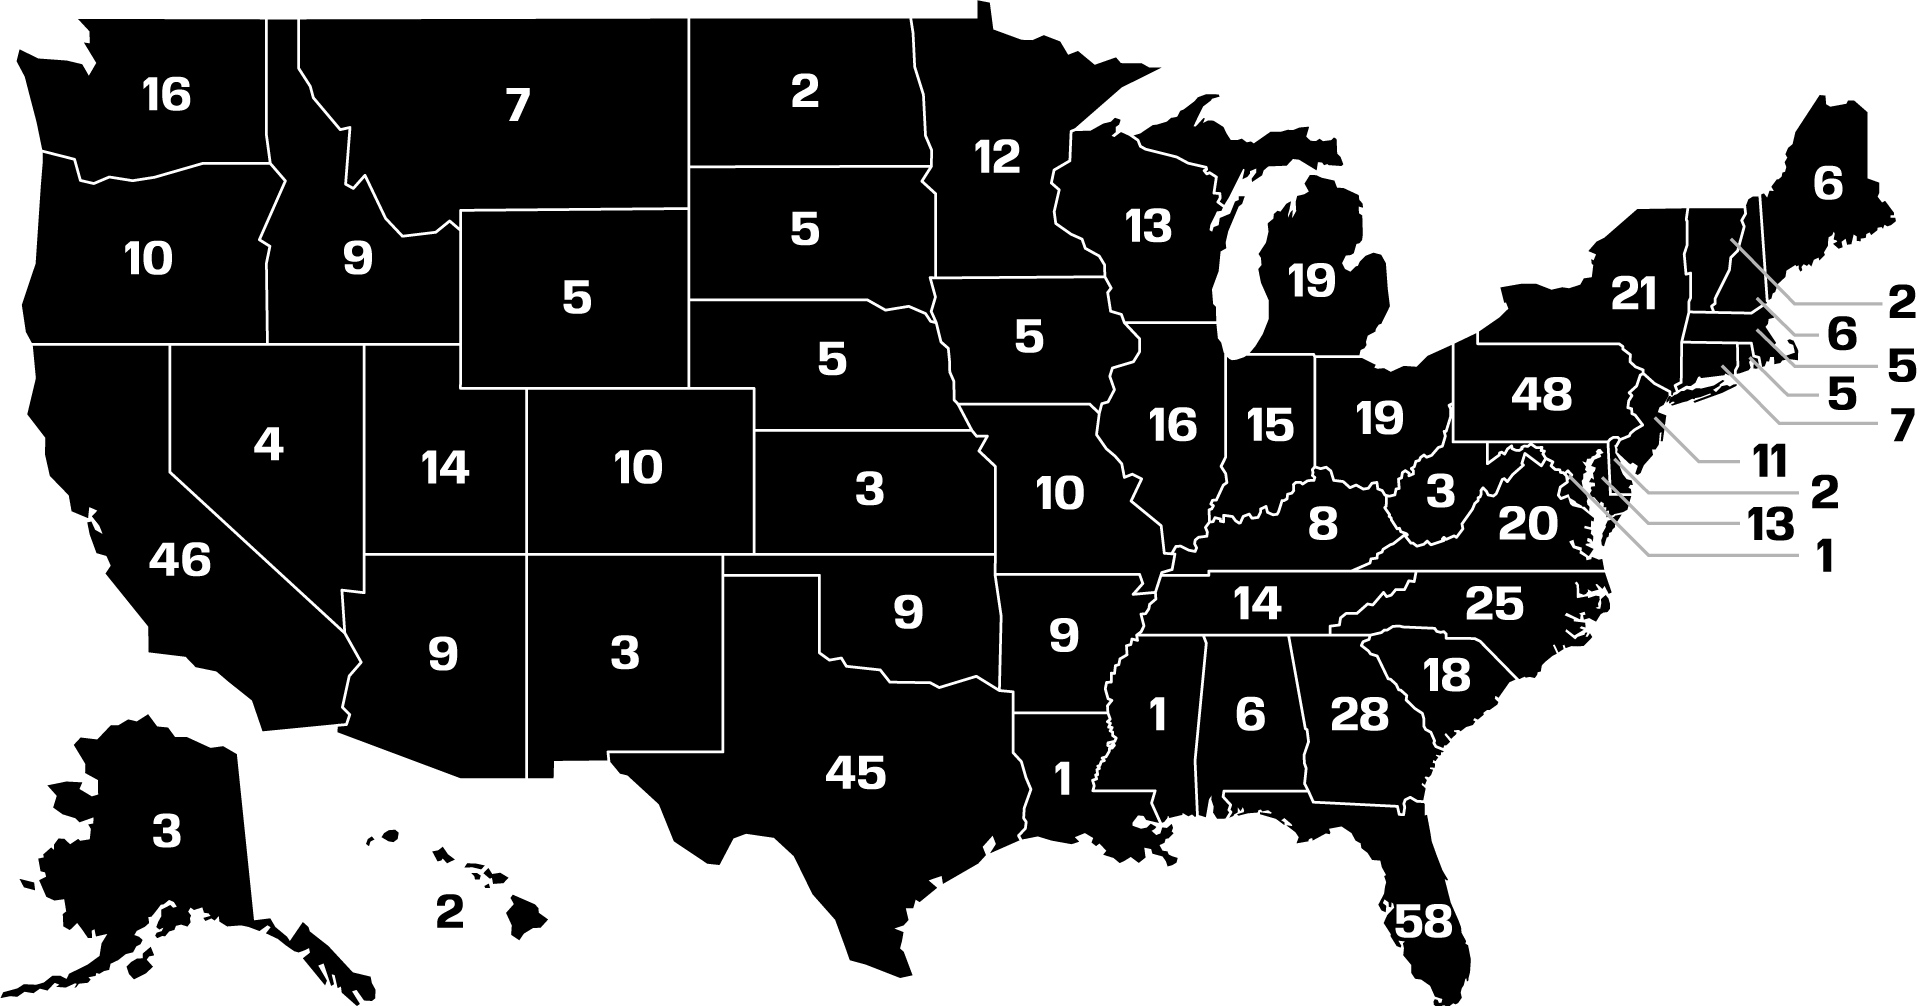 a map of the United States with the number of Antigovernment groups in each state